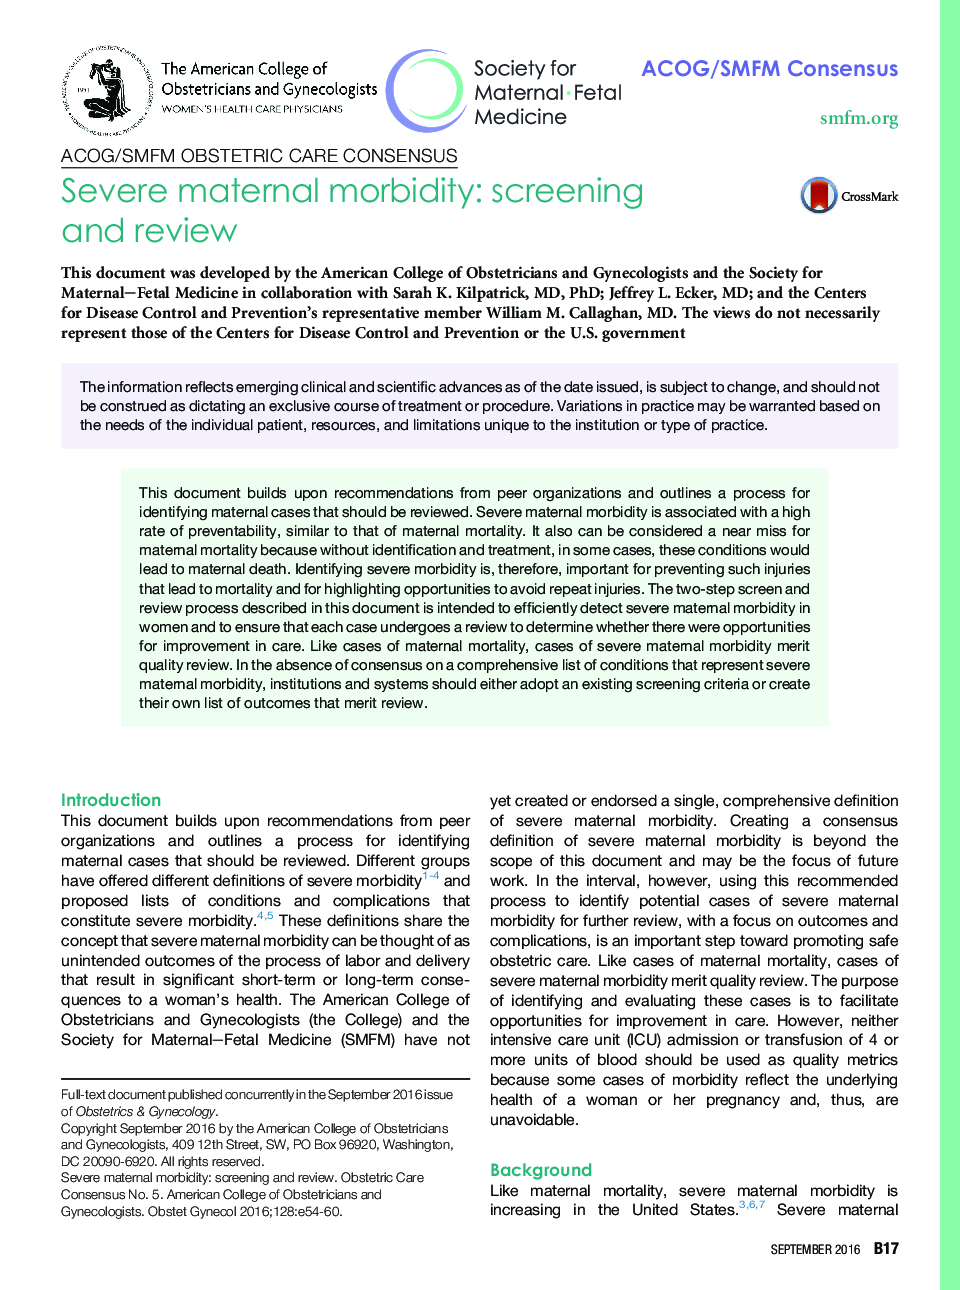 Severe maternal morbidity: screening and review 